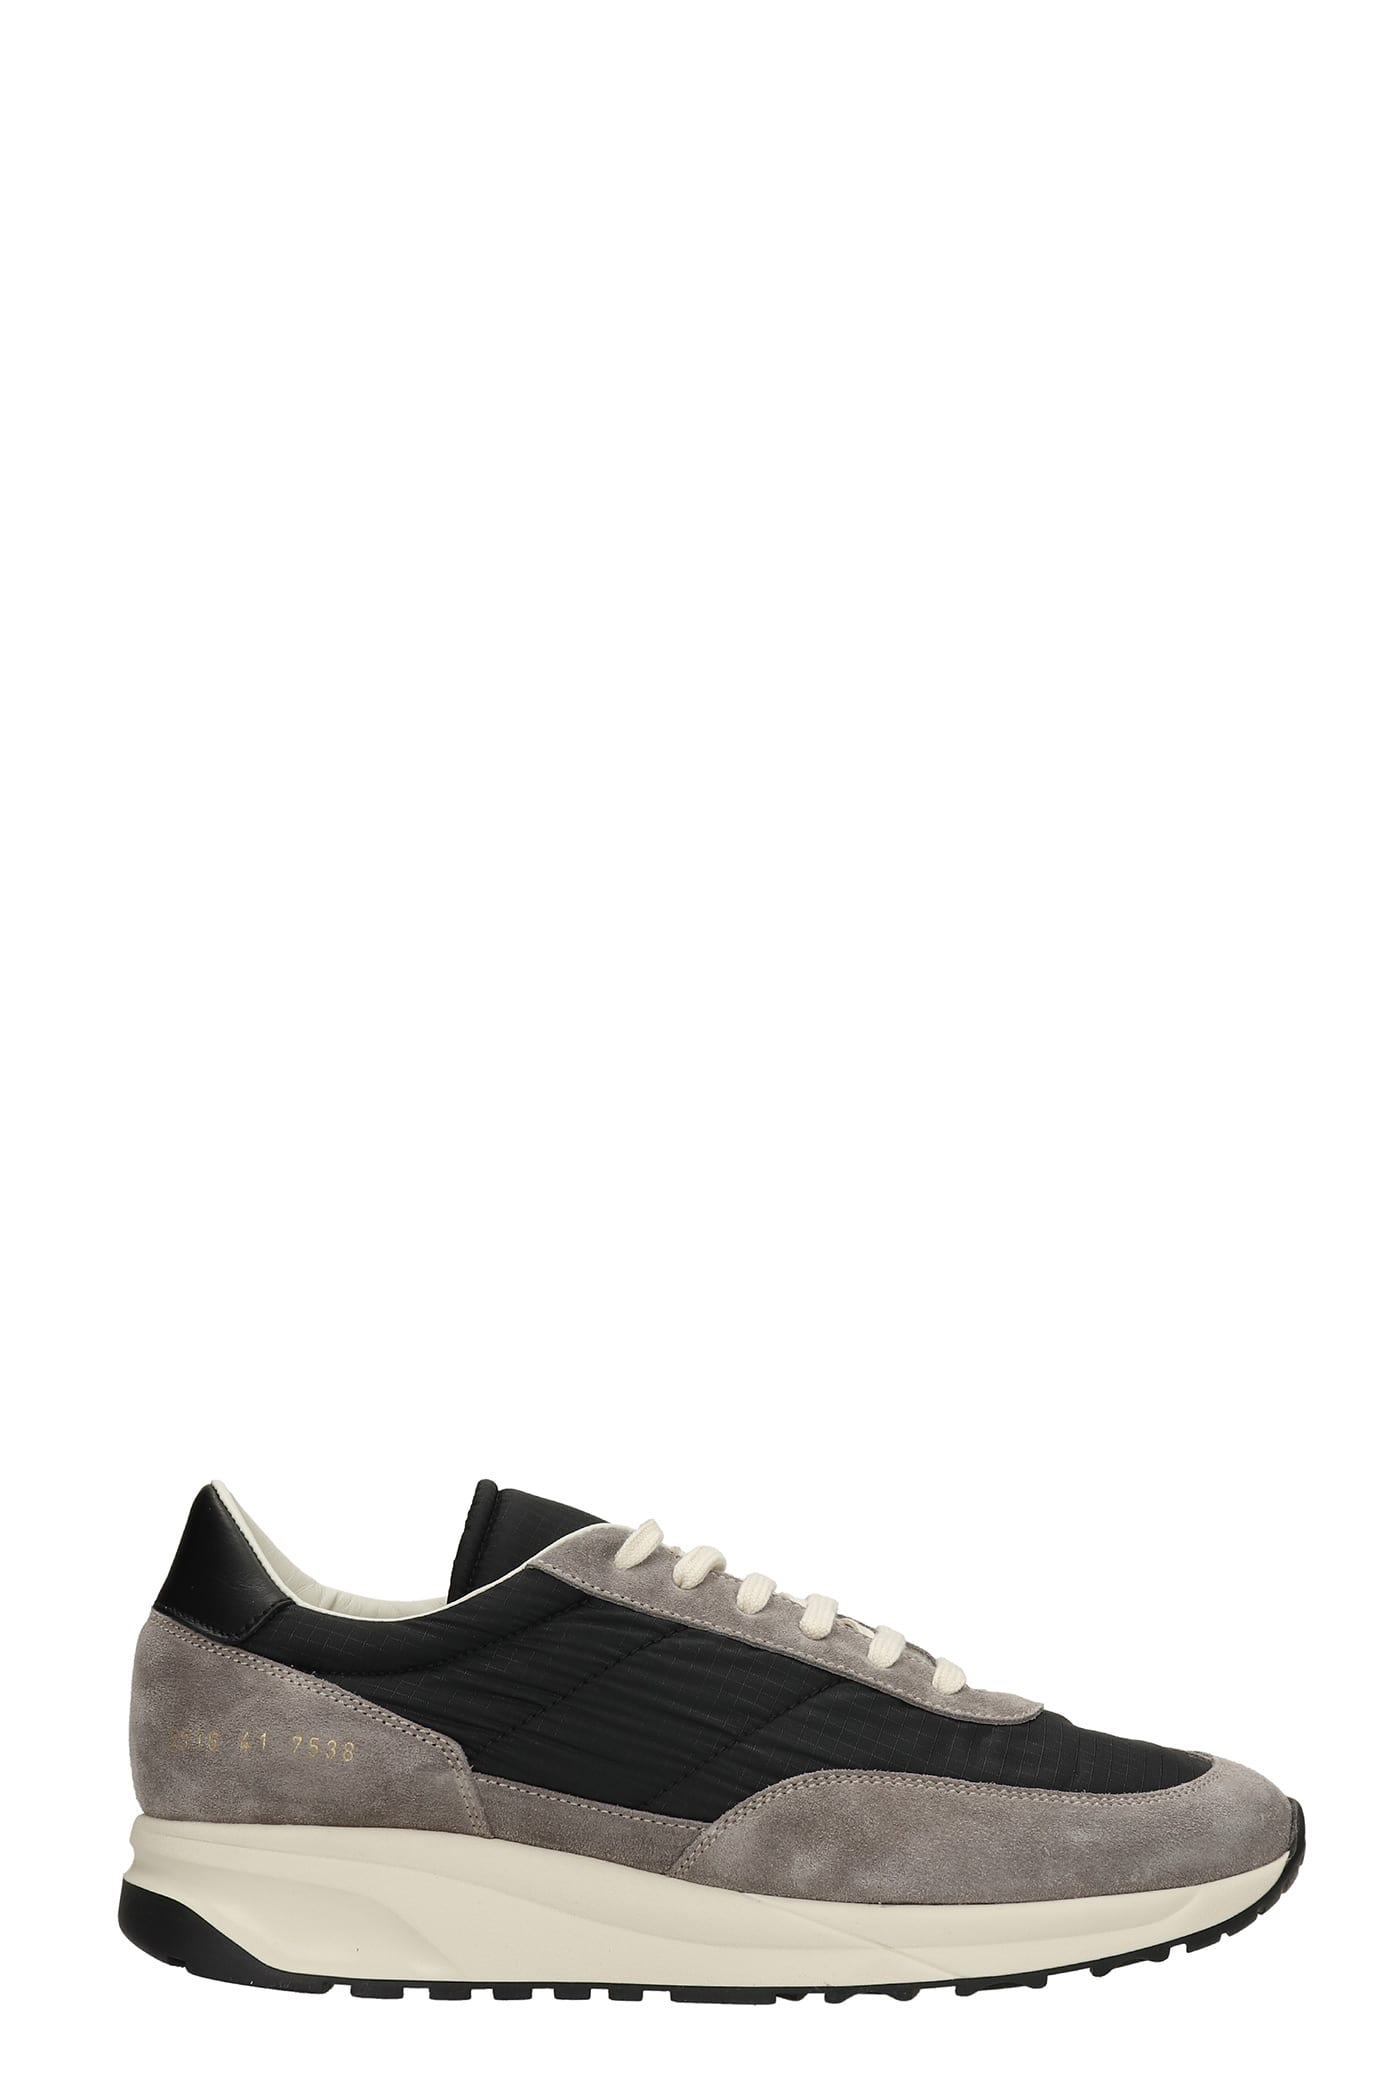 Common Projects Track Sneakers In Black Nylon